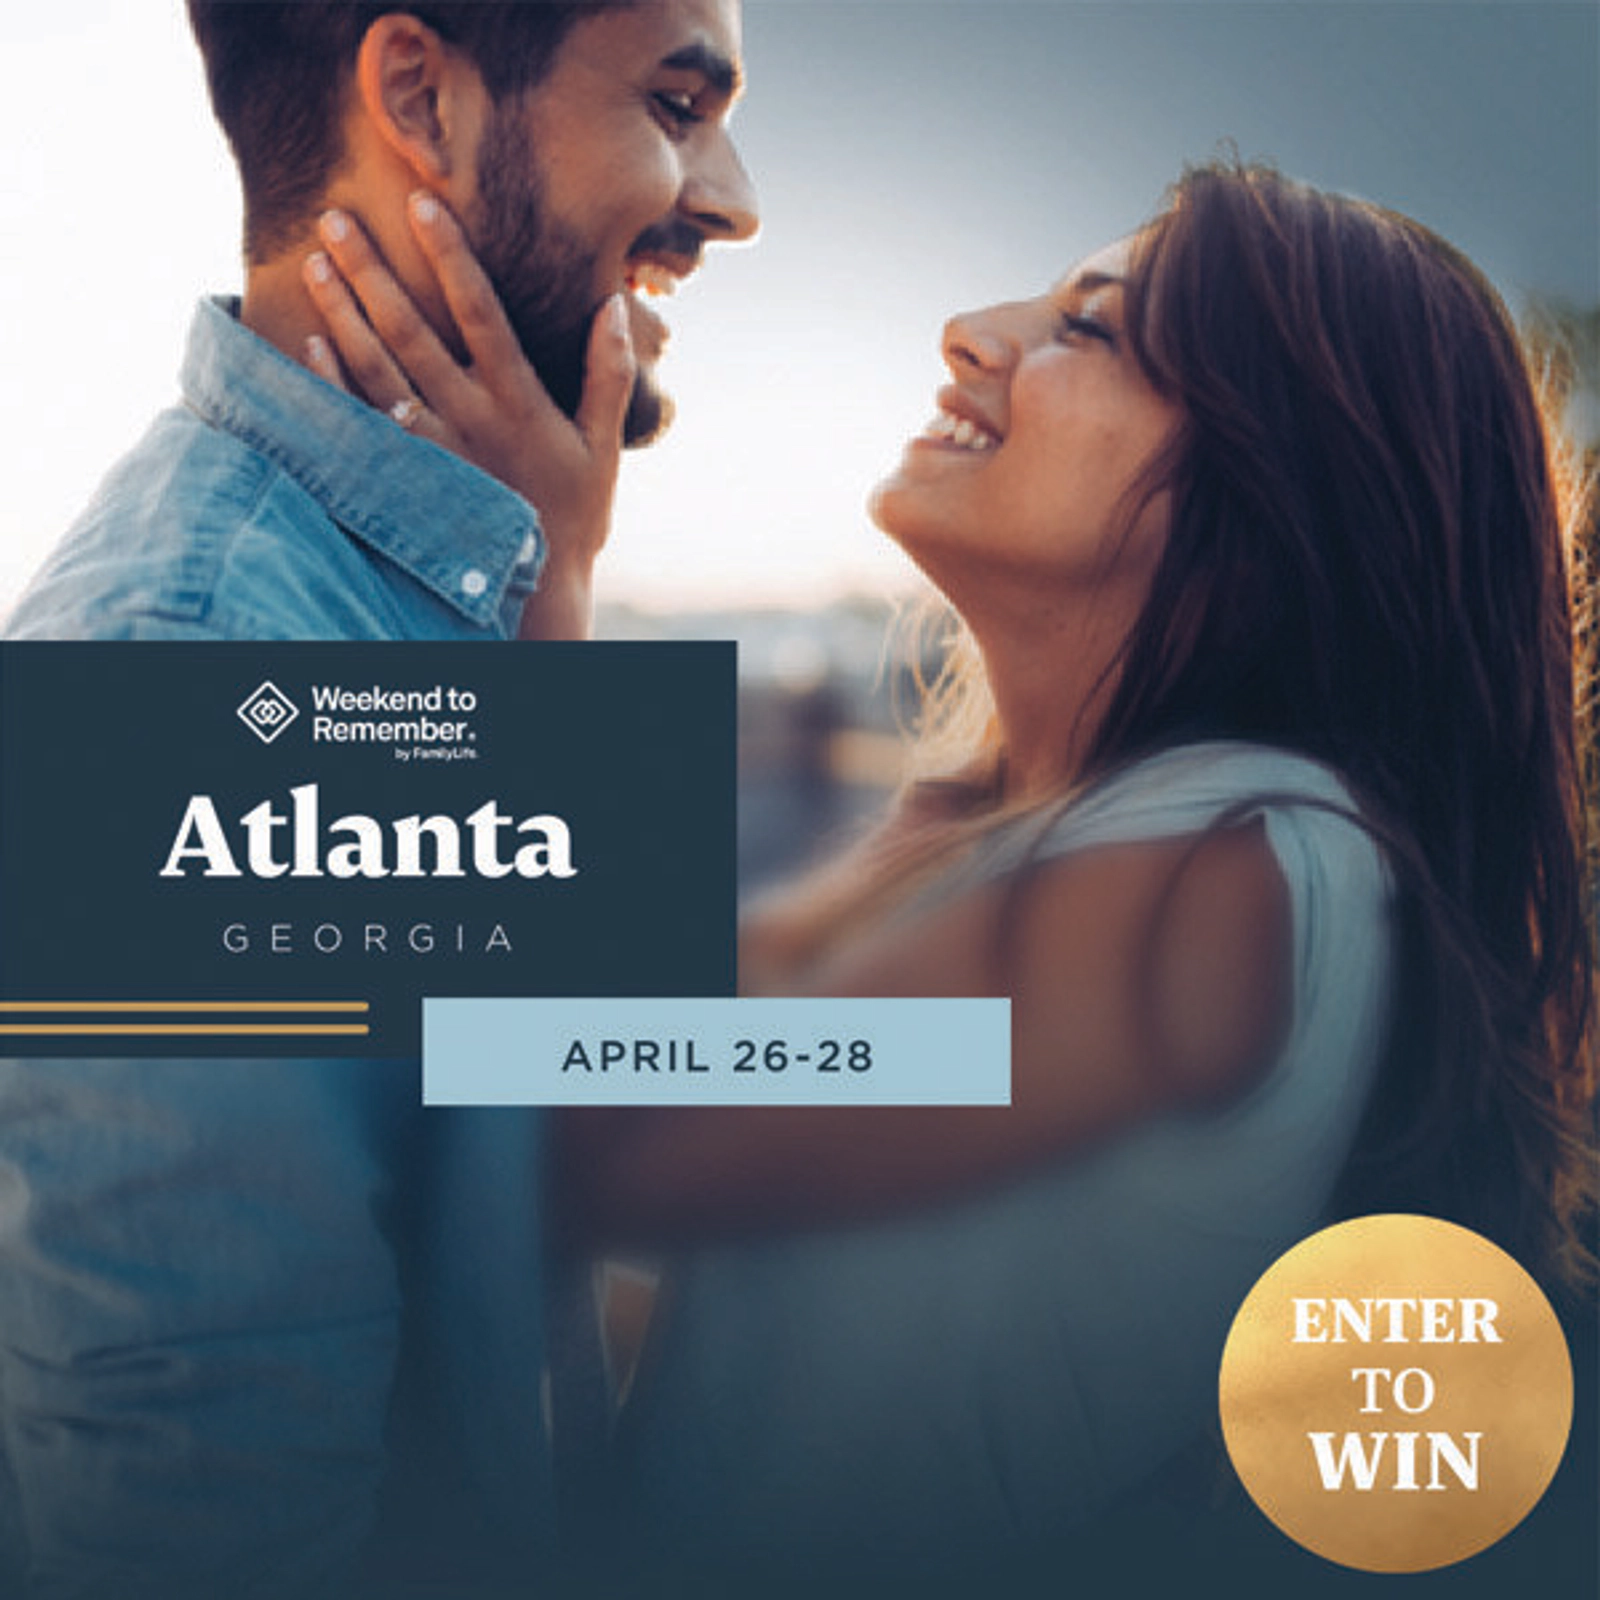 Win a "Weekend to Remember" Marriage Staycation from FamilyLife!